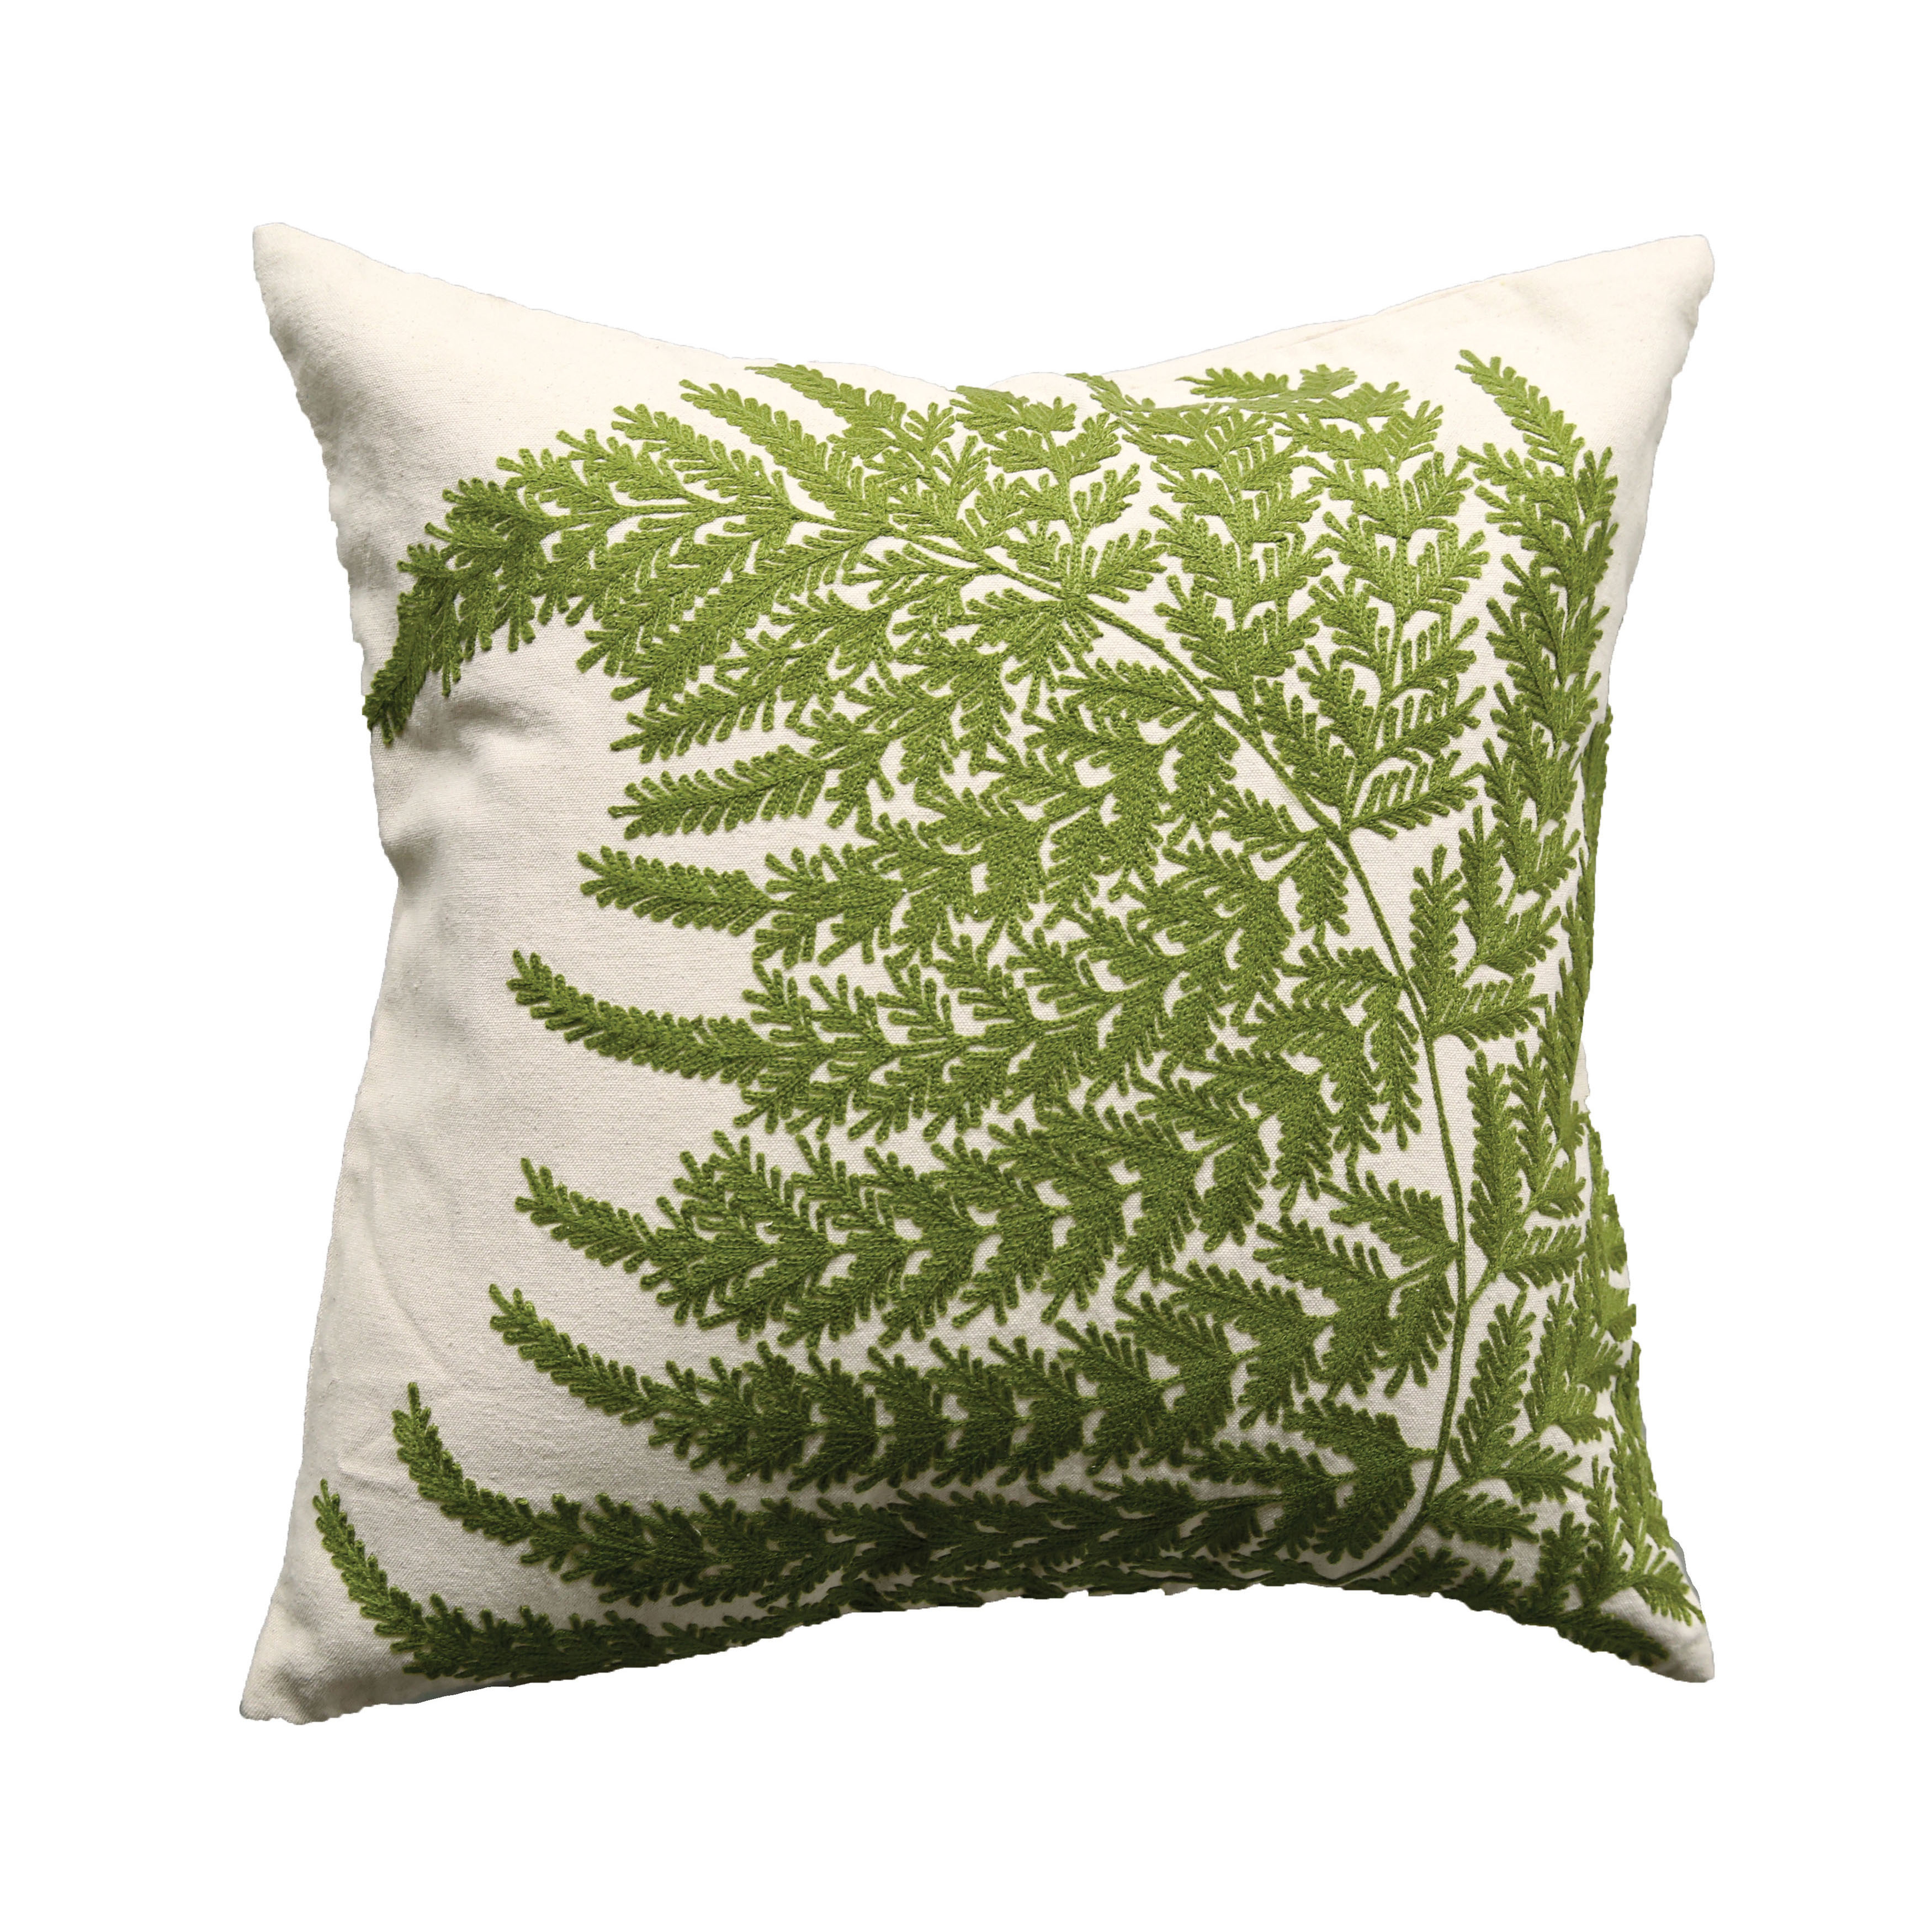 White Square Cotton Pillow with Embroidered Green Ferns - Nomad Home